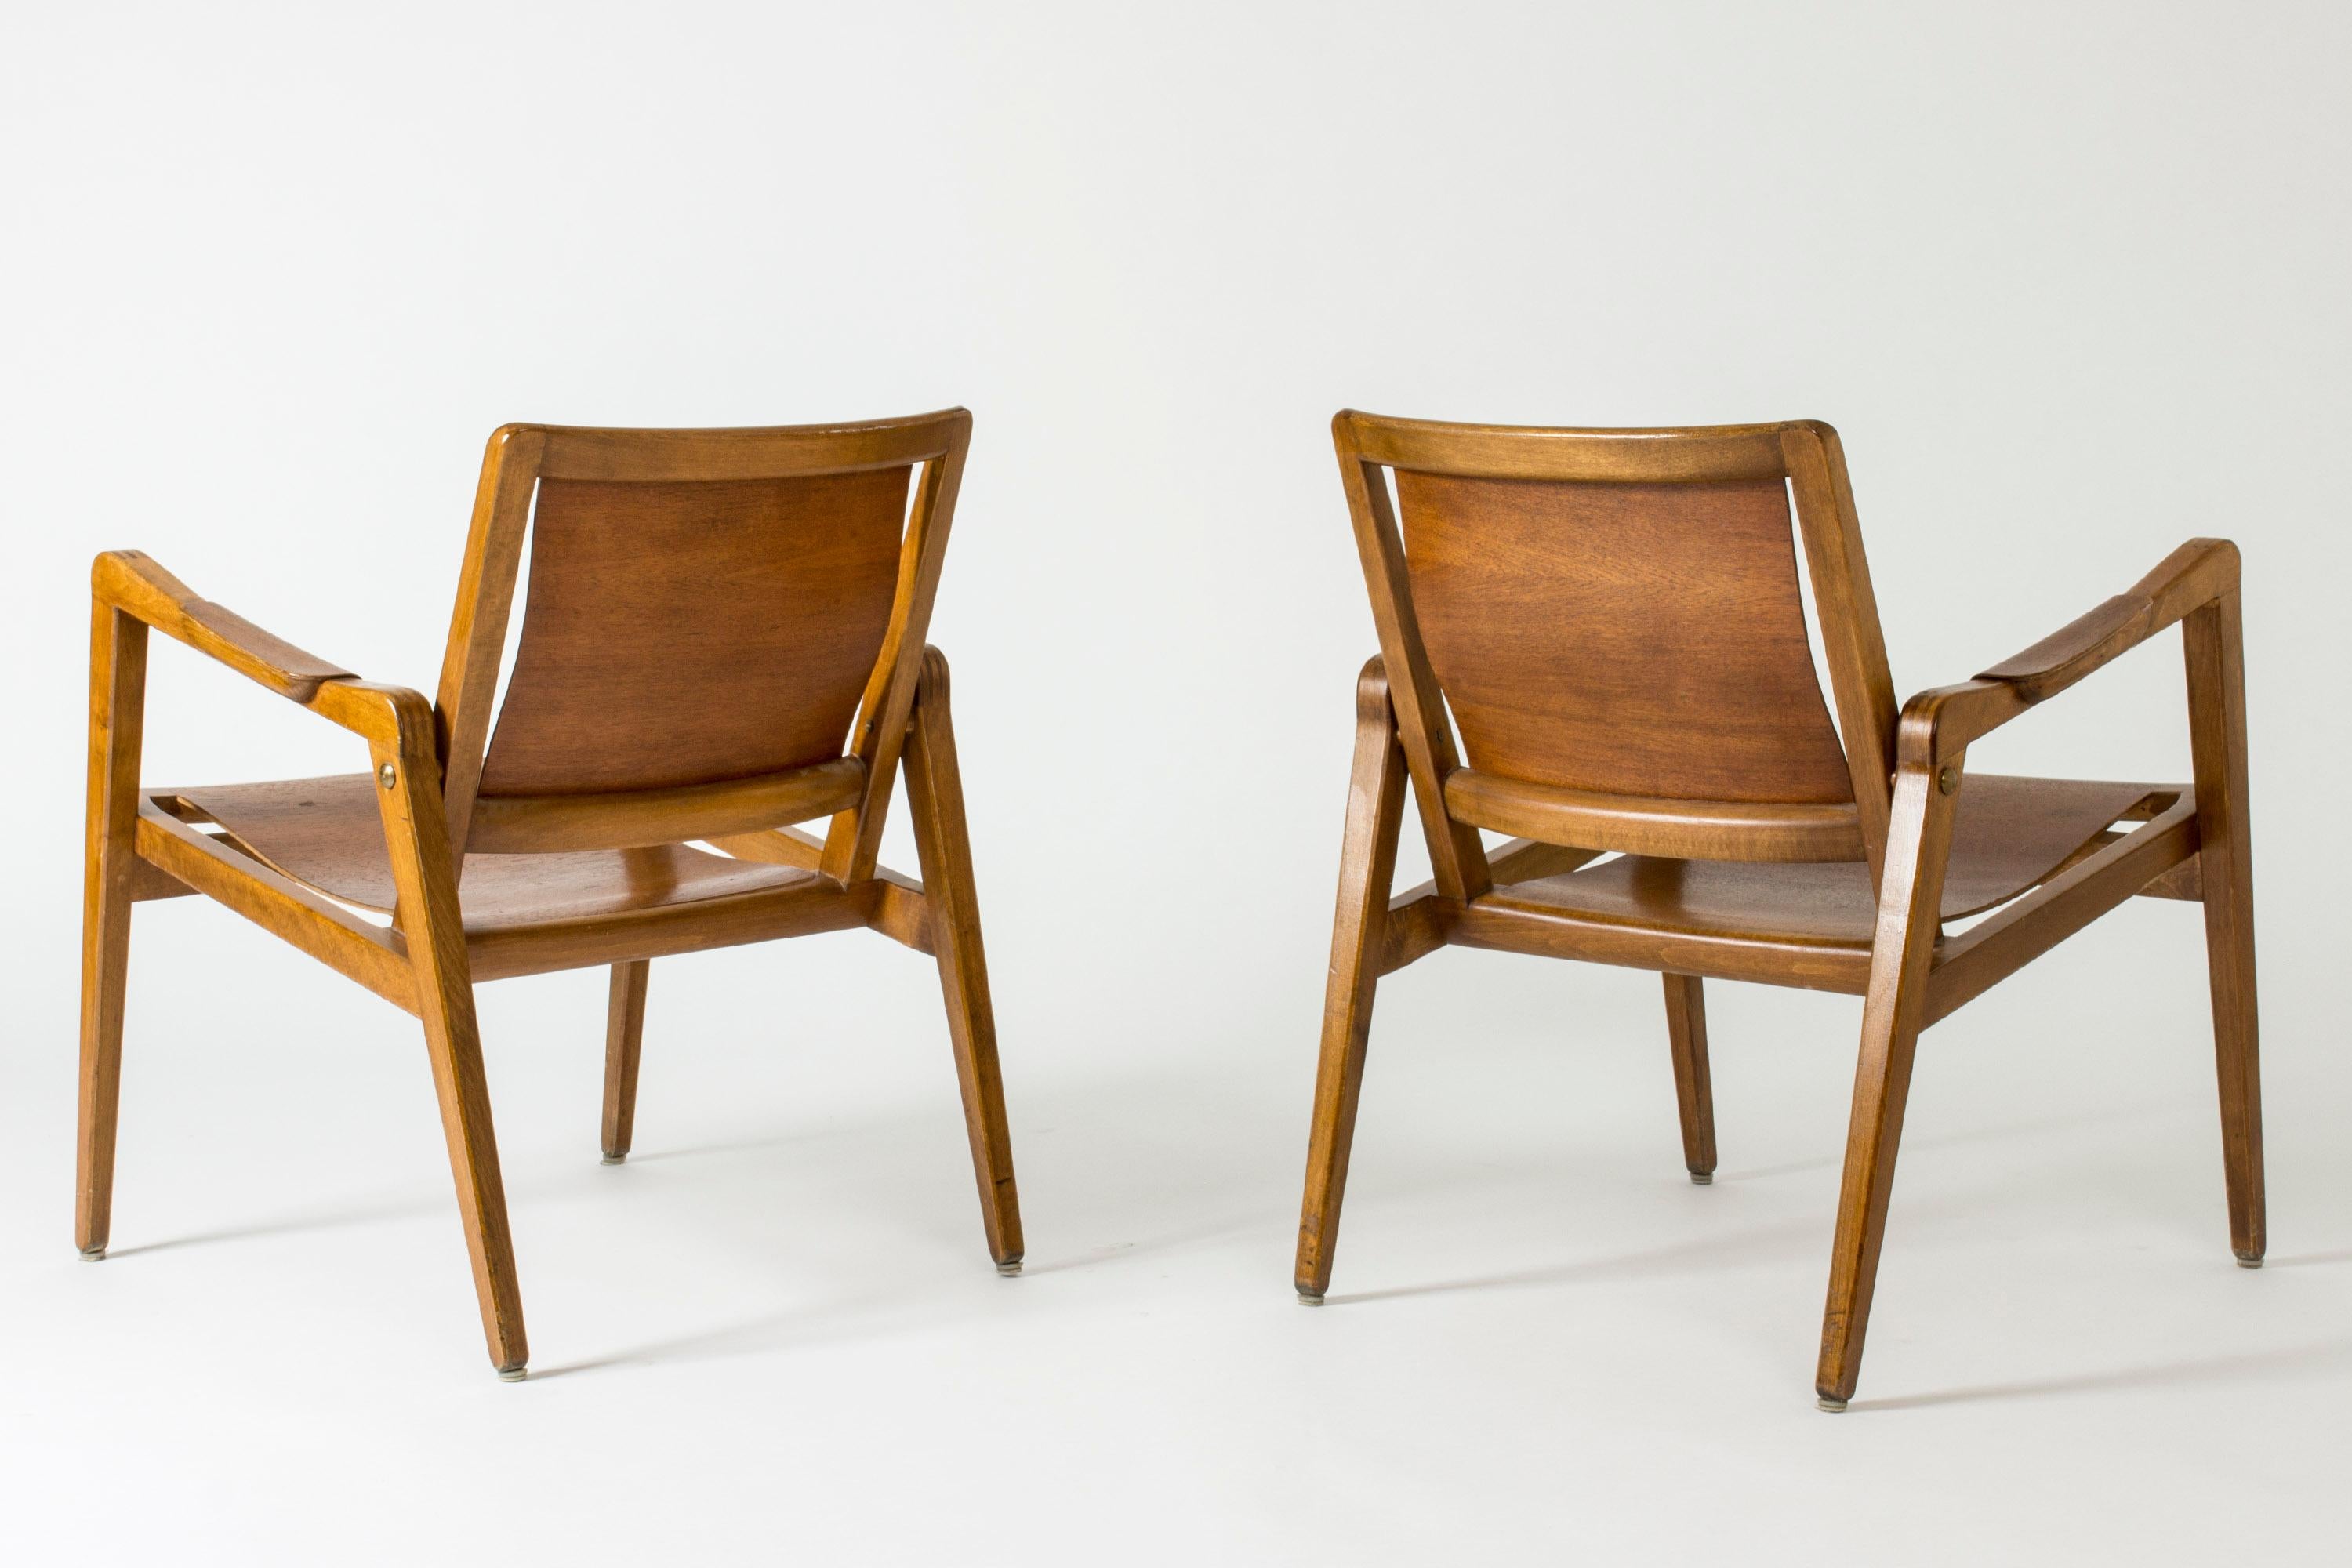 Elm Pair of Armchairs by Axel Larsson for Bodafors, Sweden, 1940s.